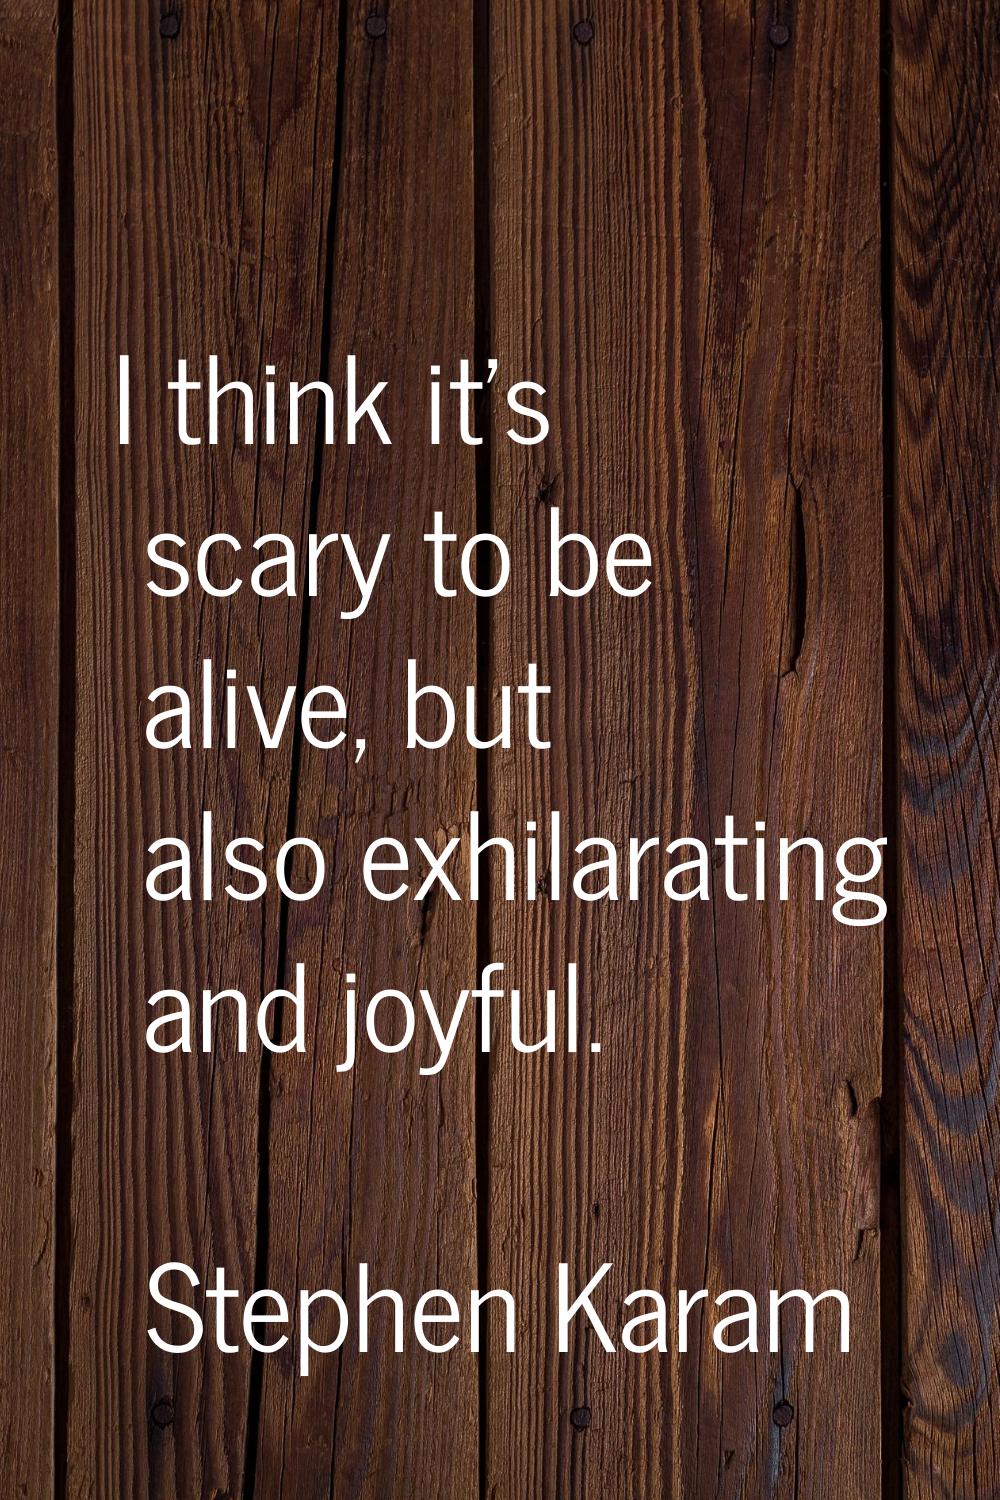 I think it's scary to be alive, but also exhilarating and joyful.